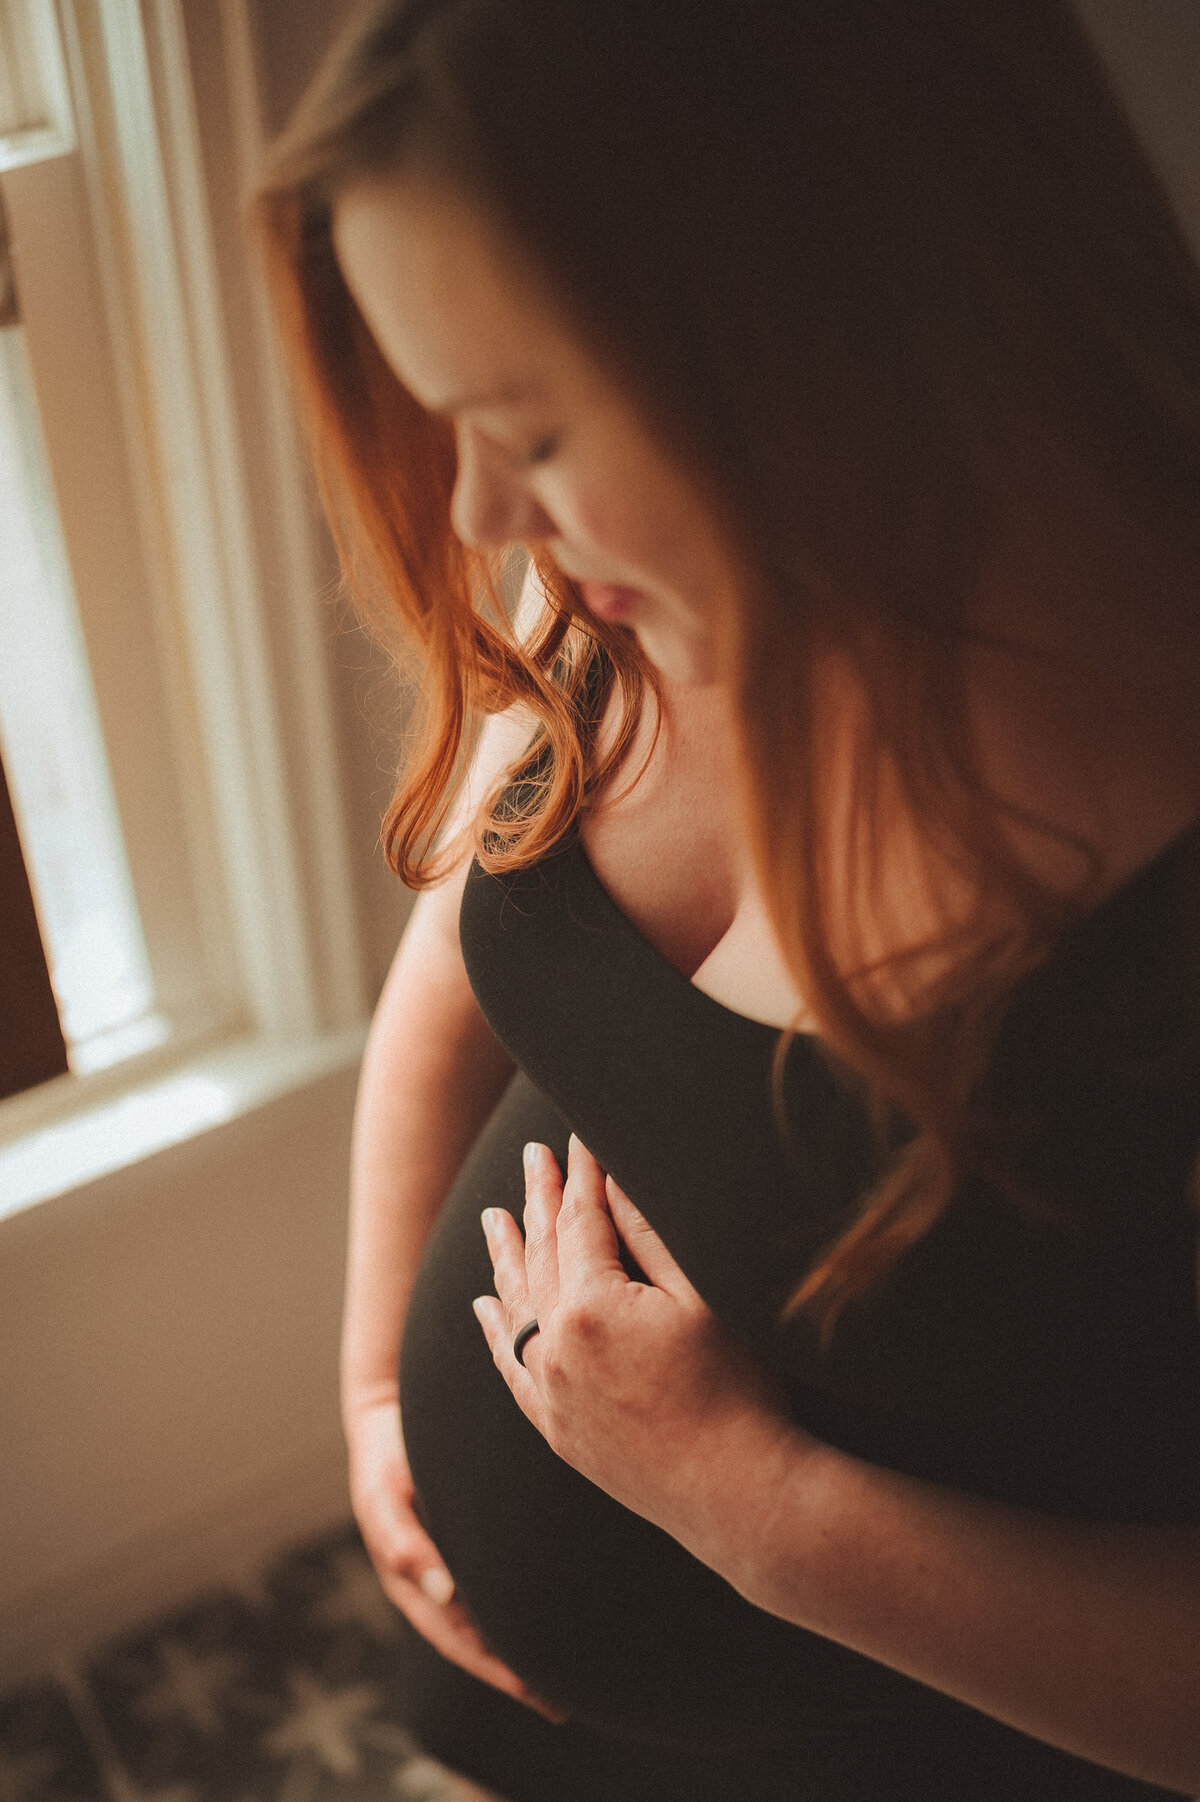 In the heart of Robbinsdale, this intimate maternity portrait captures a mother's deep connection with her growing baby. Bathed in soft, natural light from a nearby window, she gazes lovingly at her pregnant belly, embodying the beauty of this precious moment in her own home.